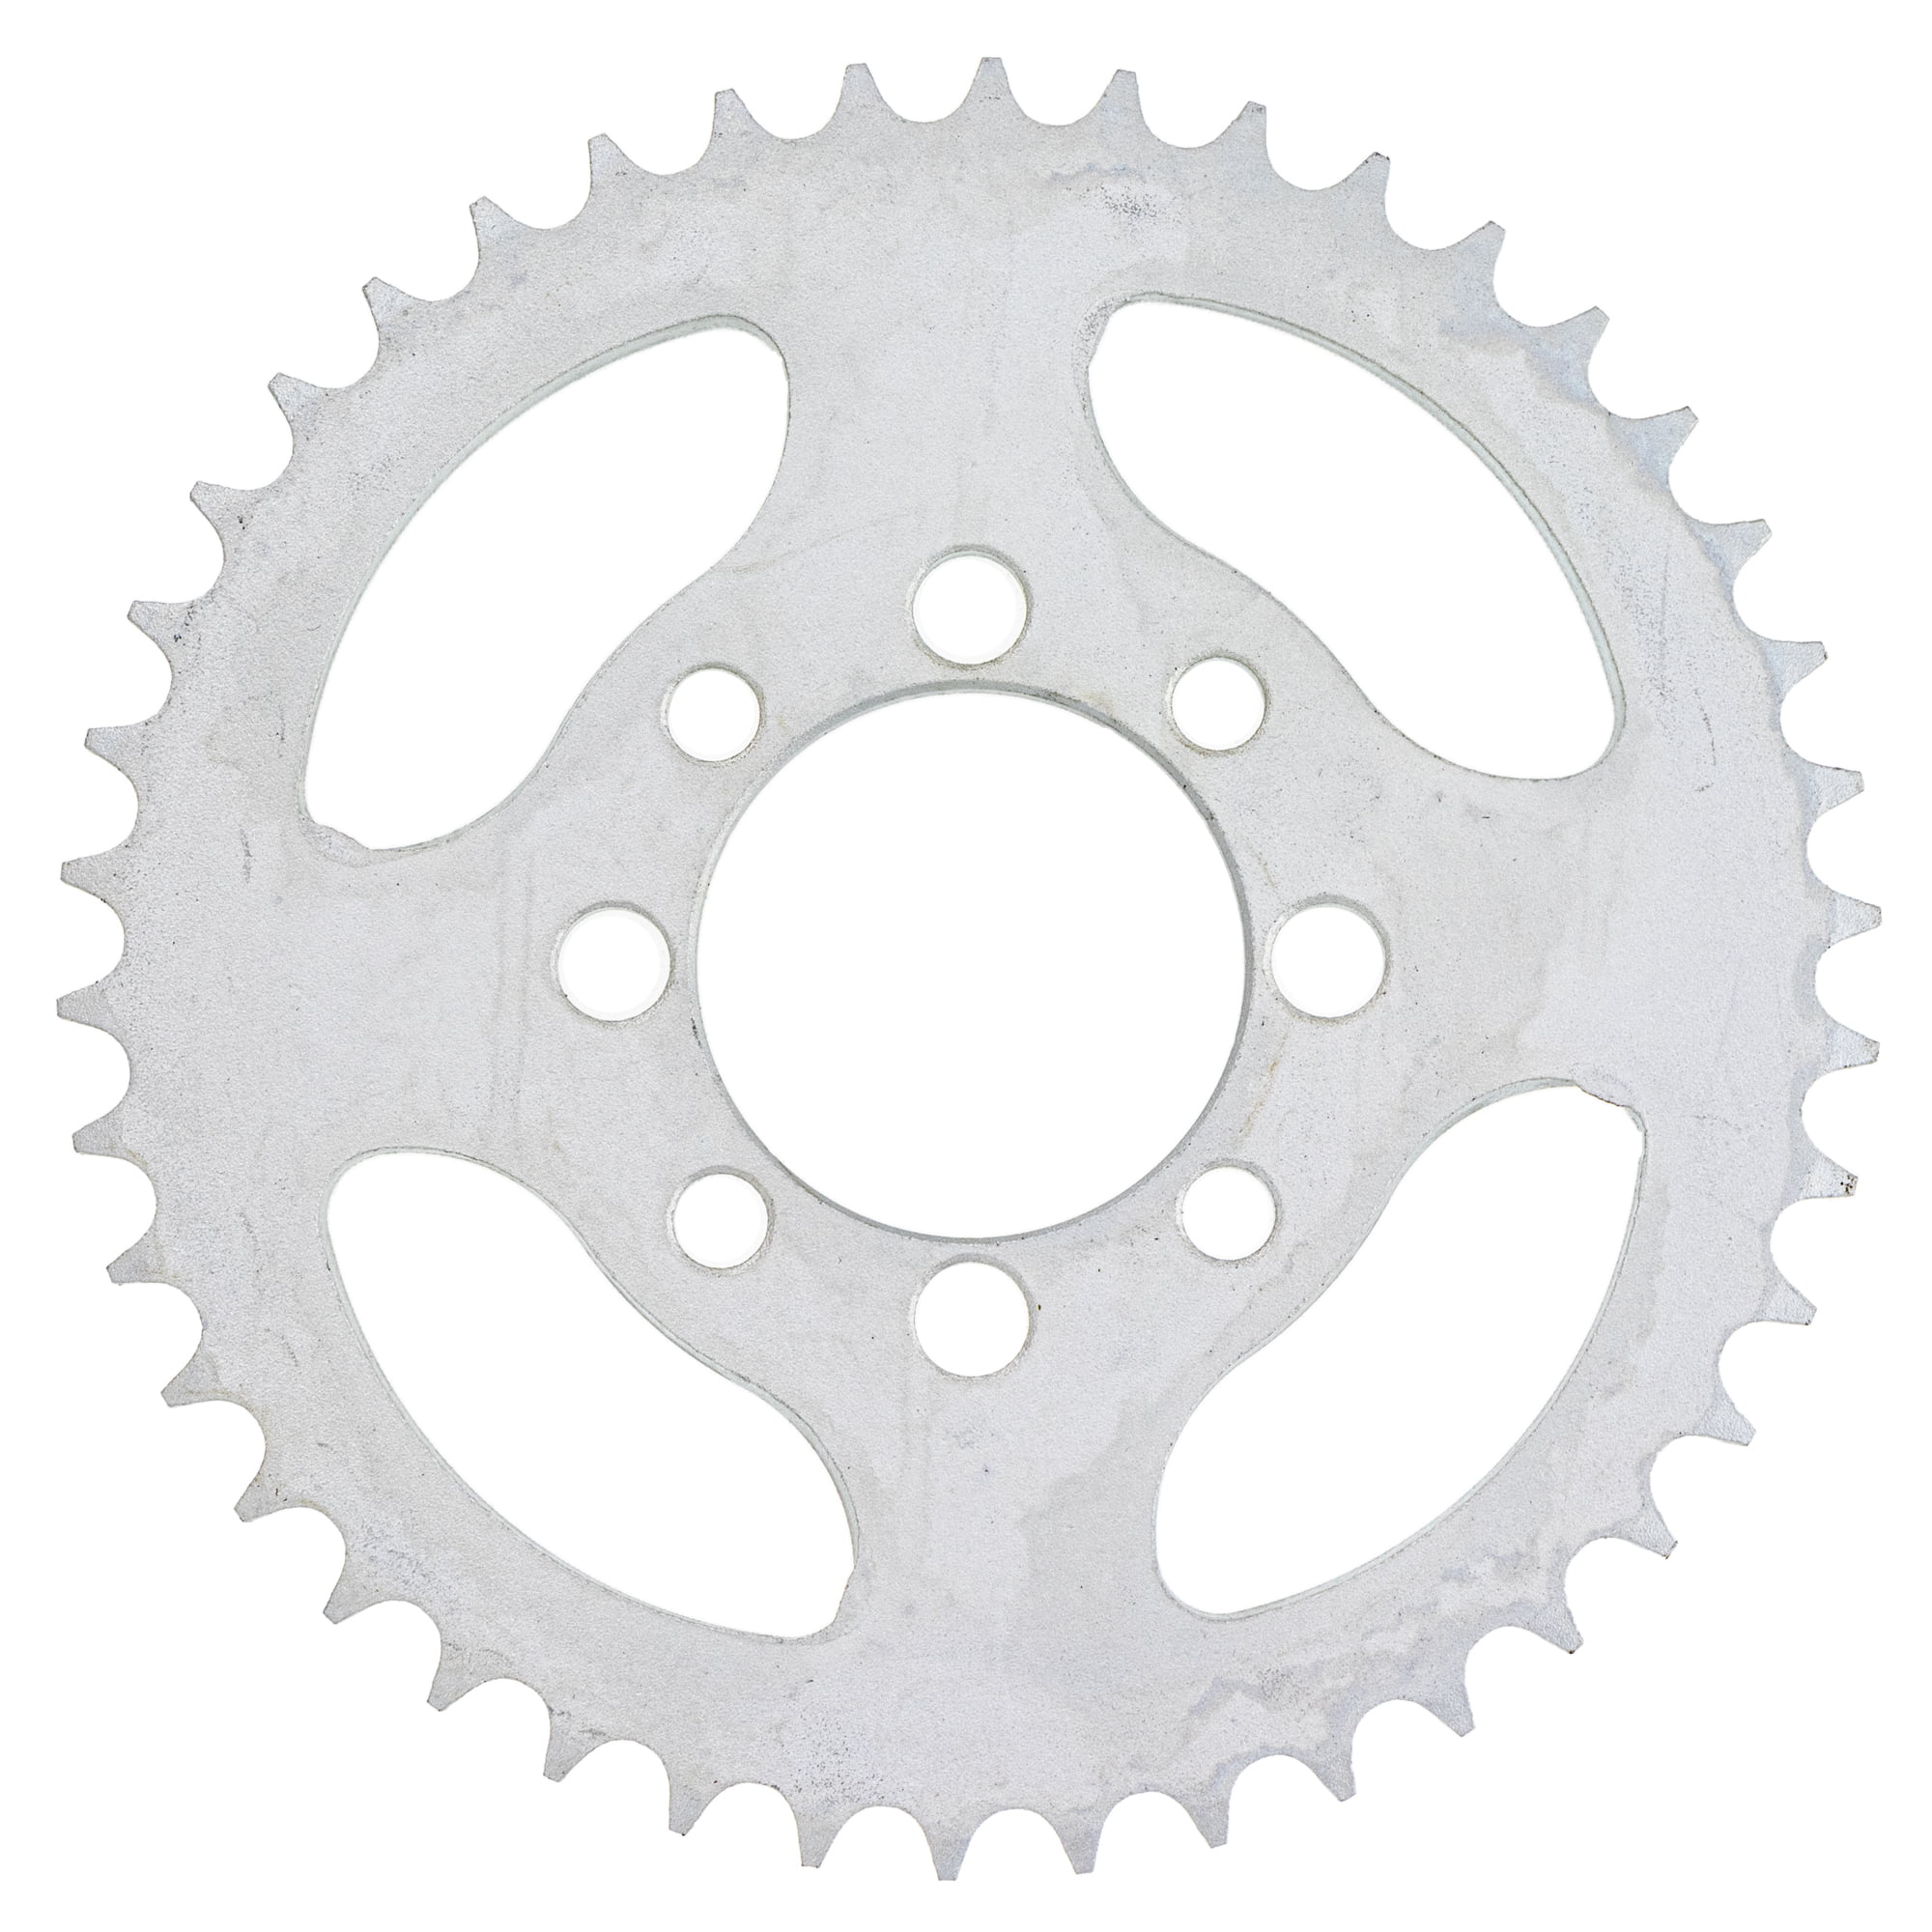 NICHE 428 Pitch Front 15T and Rear 42T Drive Sprocket Kit for 1976-1981 Kawasaki KE100ment 13144-054